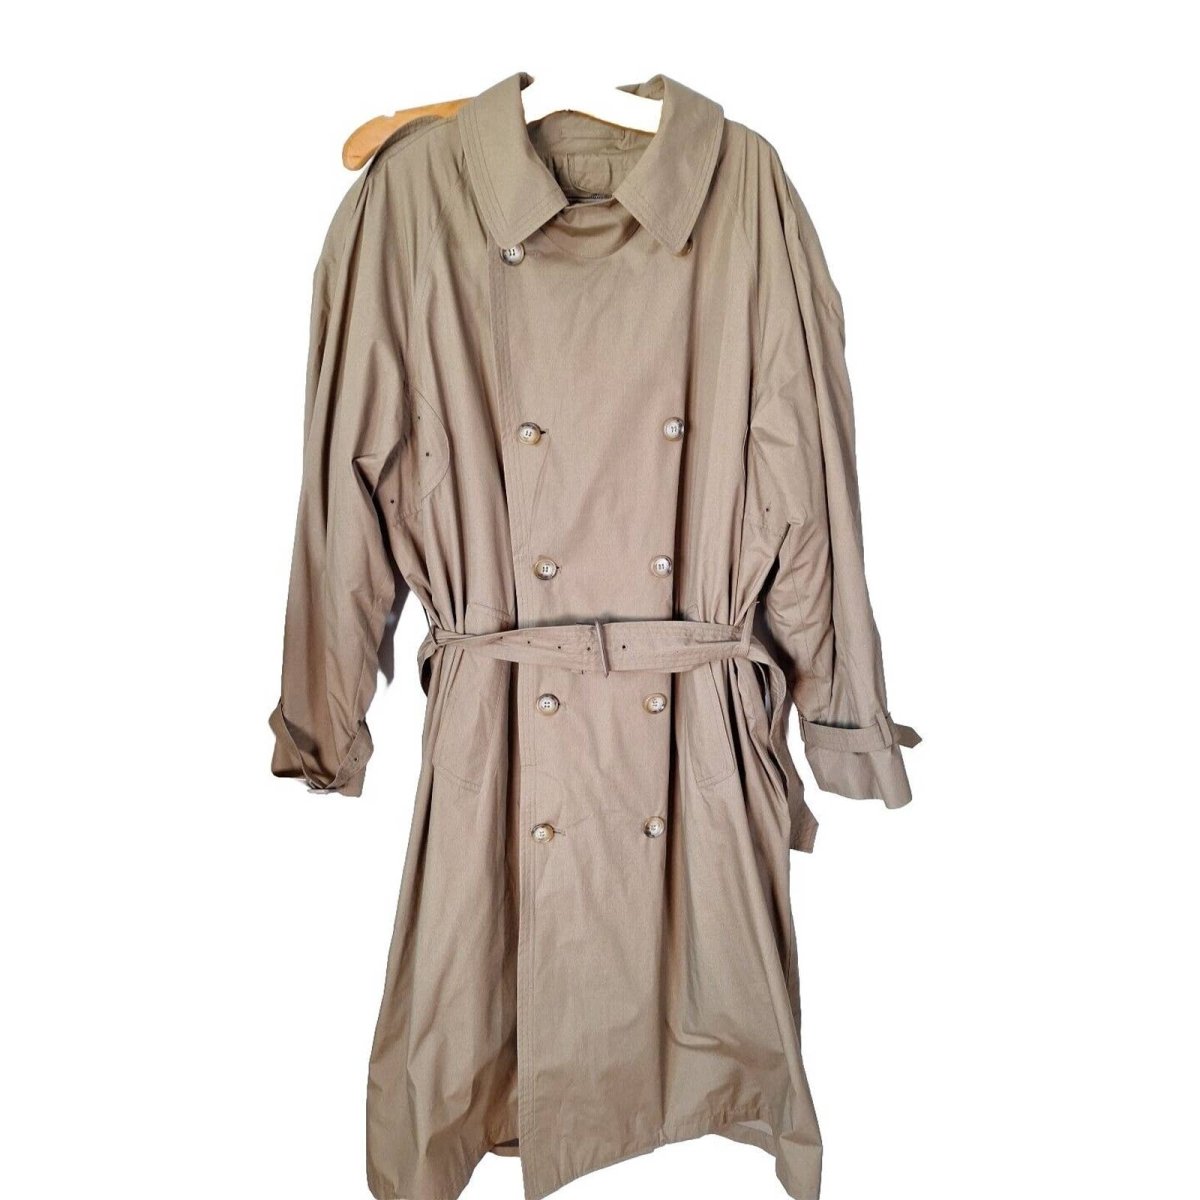 Vintage London Fog Taupe/Beige Trench Coat w/Zip Out Thermal Lining Men Size 42R - themallvintage The Mall Vintage